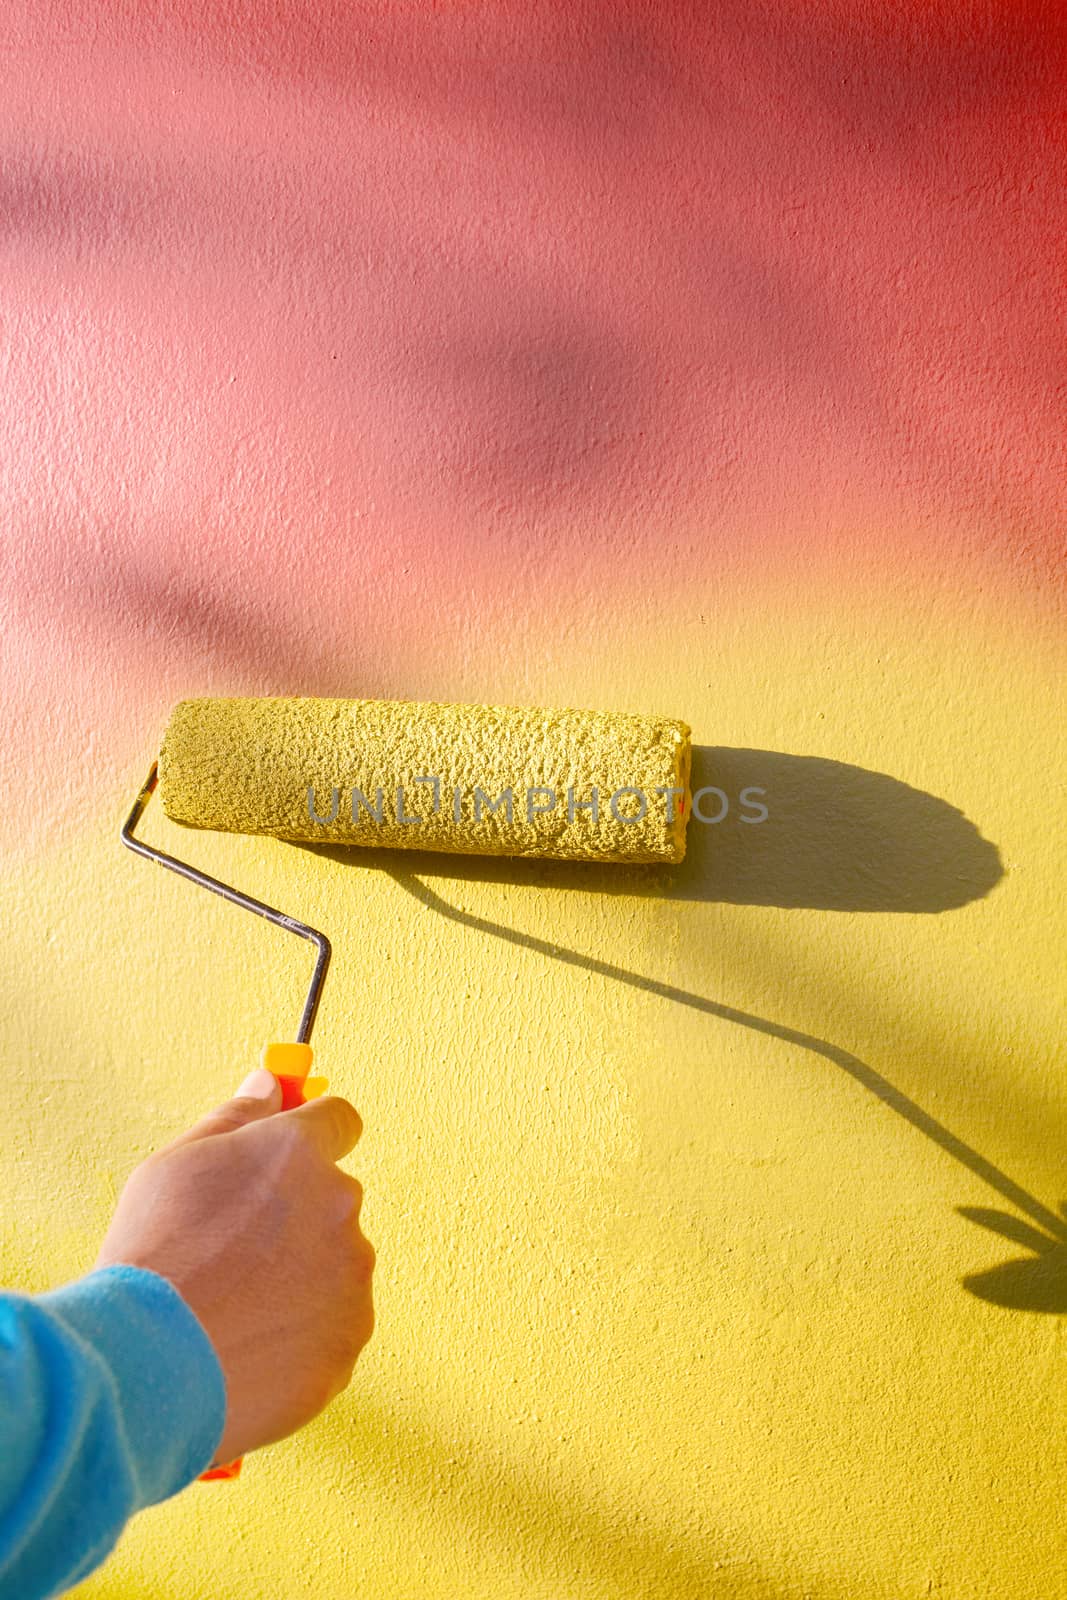 hand painting yellow wall by roller painter brush